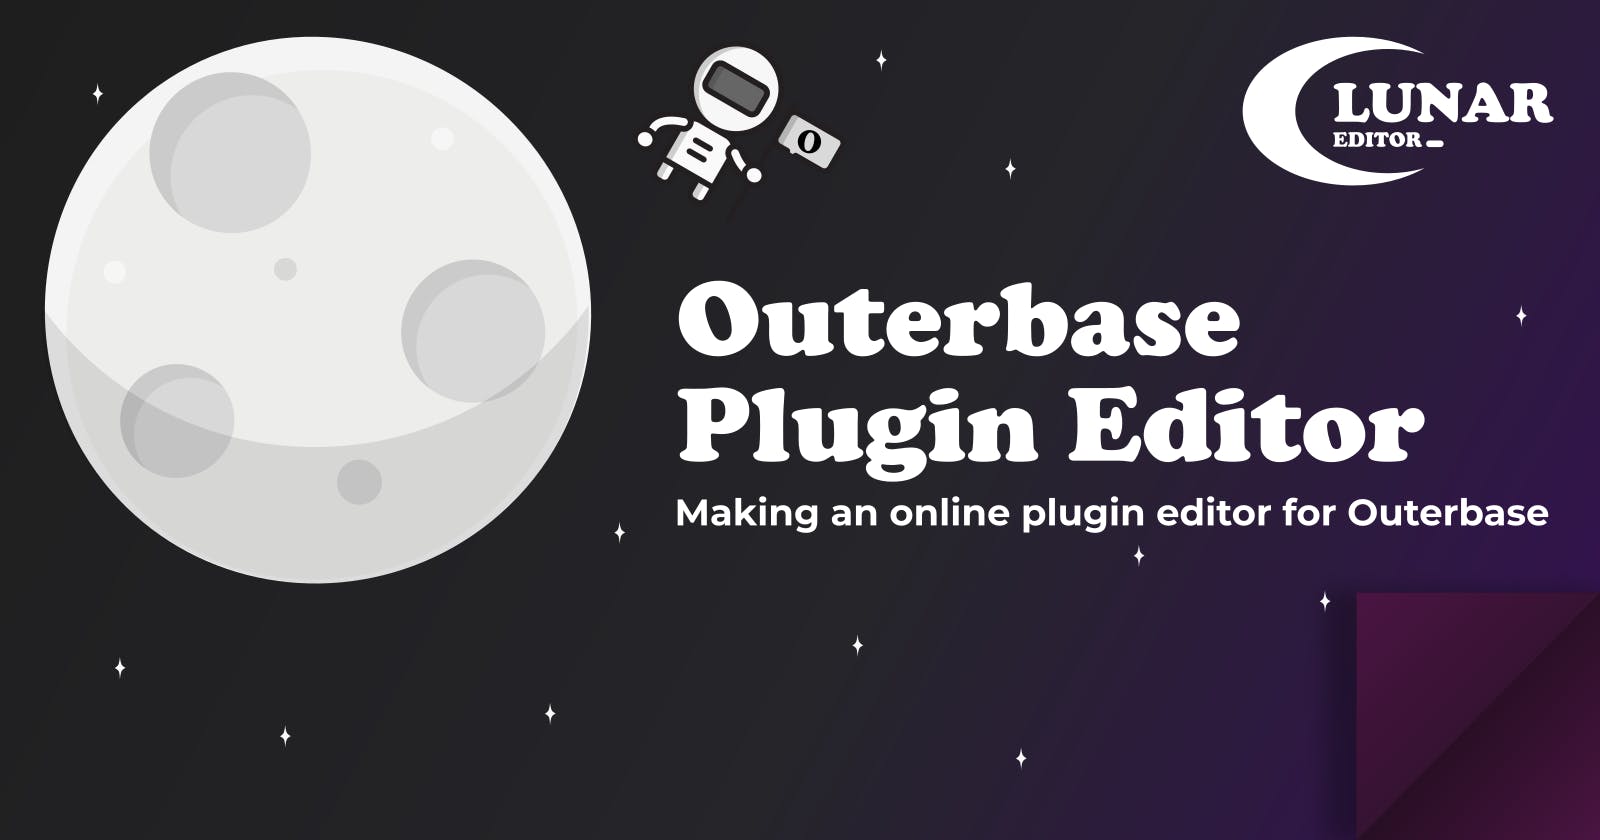 Lunar Editor: Online Editor for Outerbase Plugins